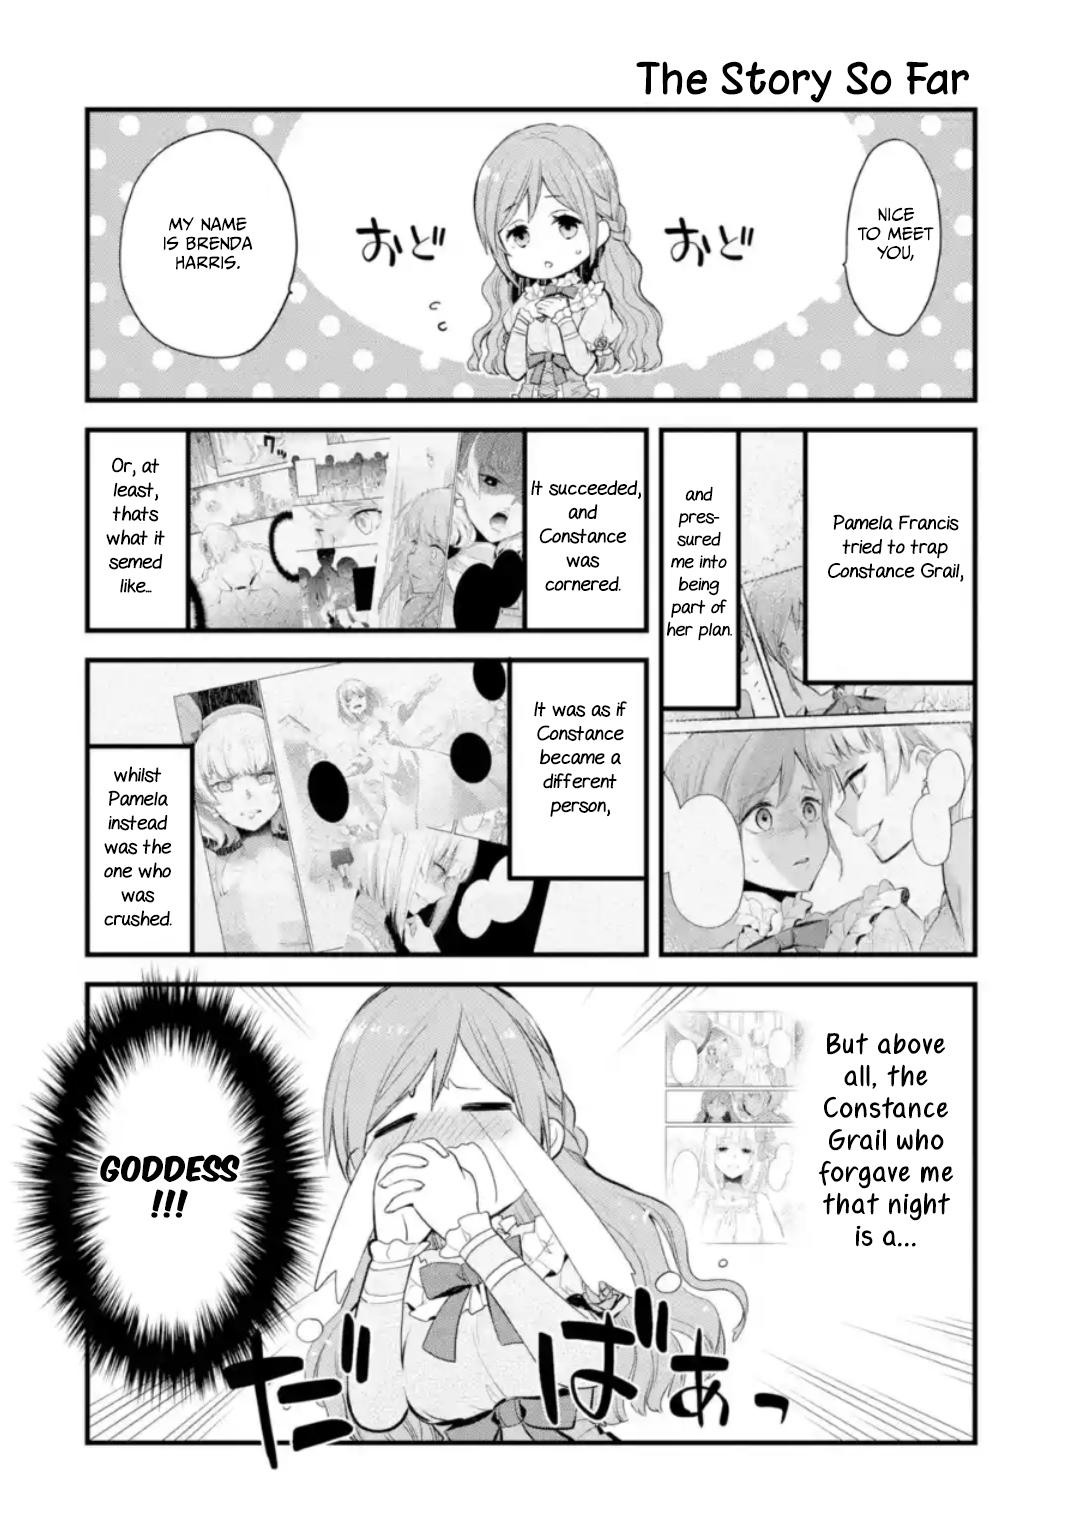 The Holy Grail of Eris Ch. 5 Payment for the Grand Meryl Anne